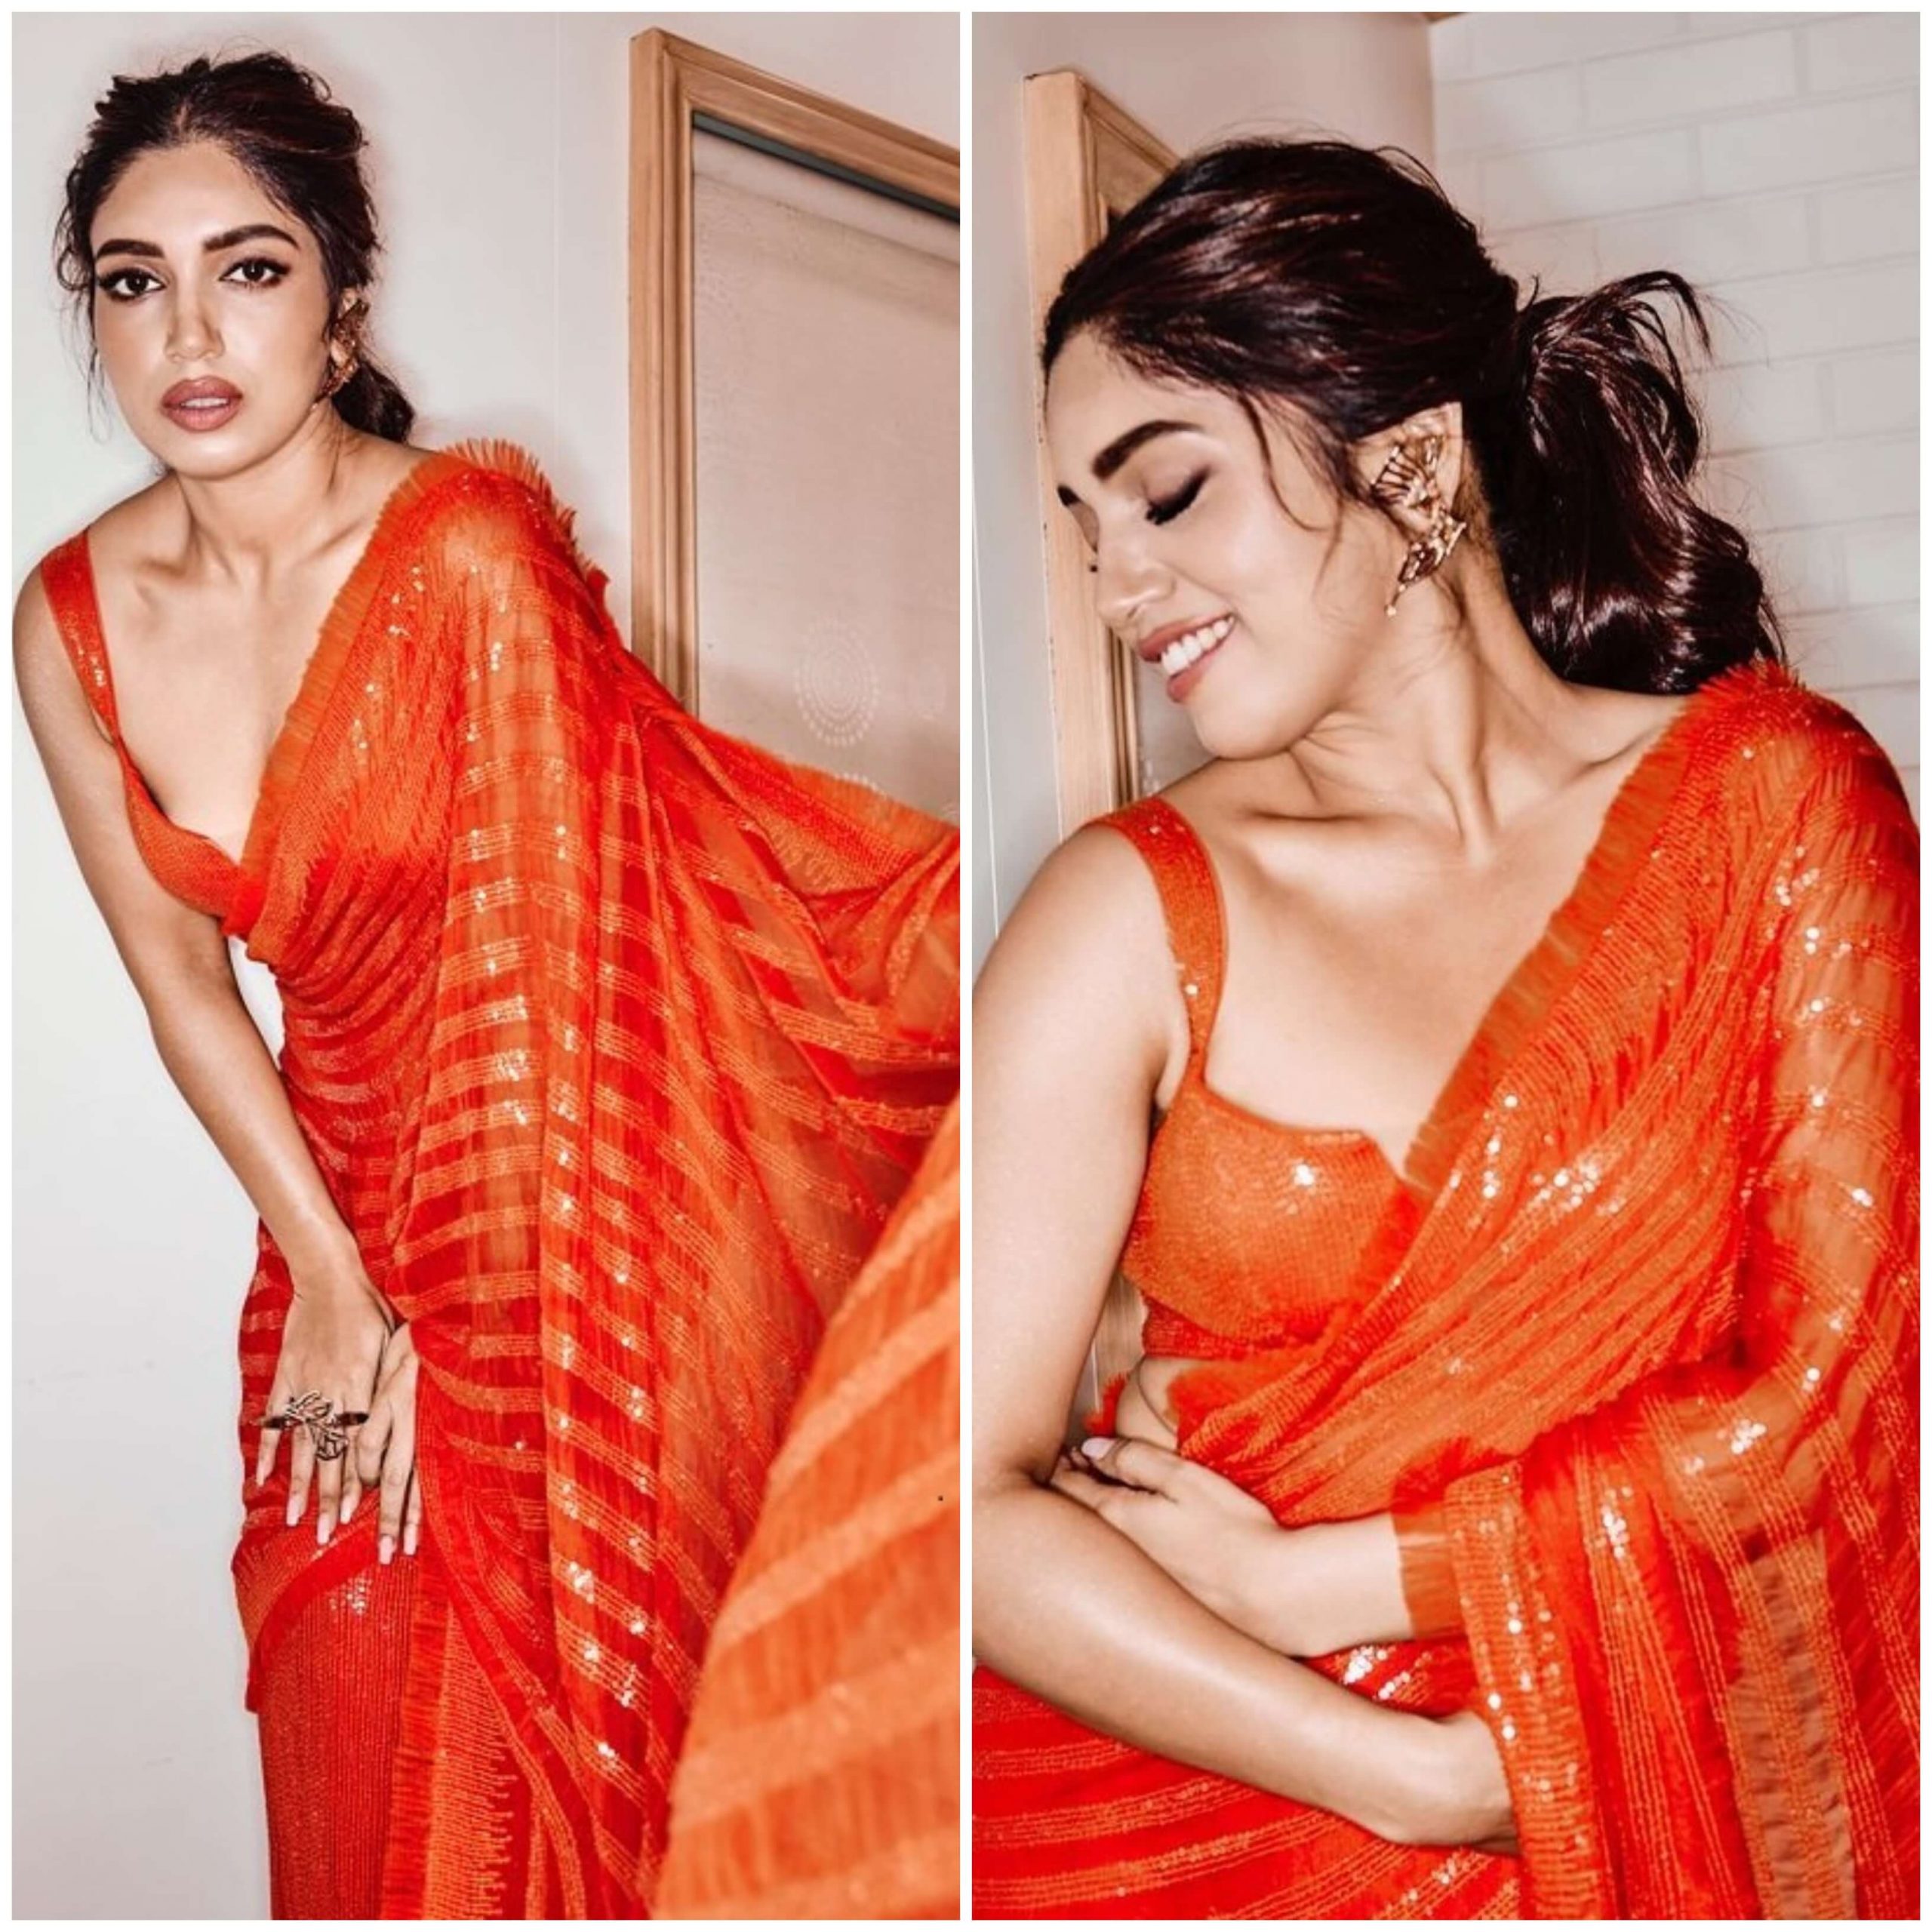 SIZZLING ORANGE SAREE WITH DEEP V-NECK Outfits for Wedding Season